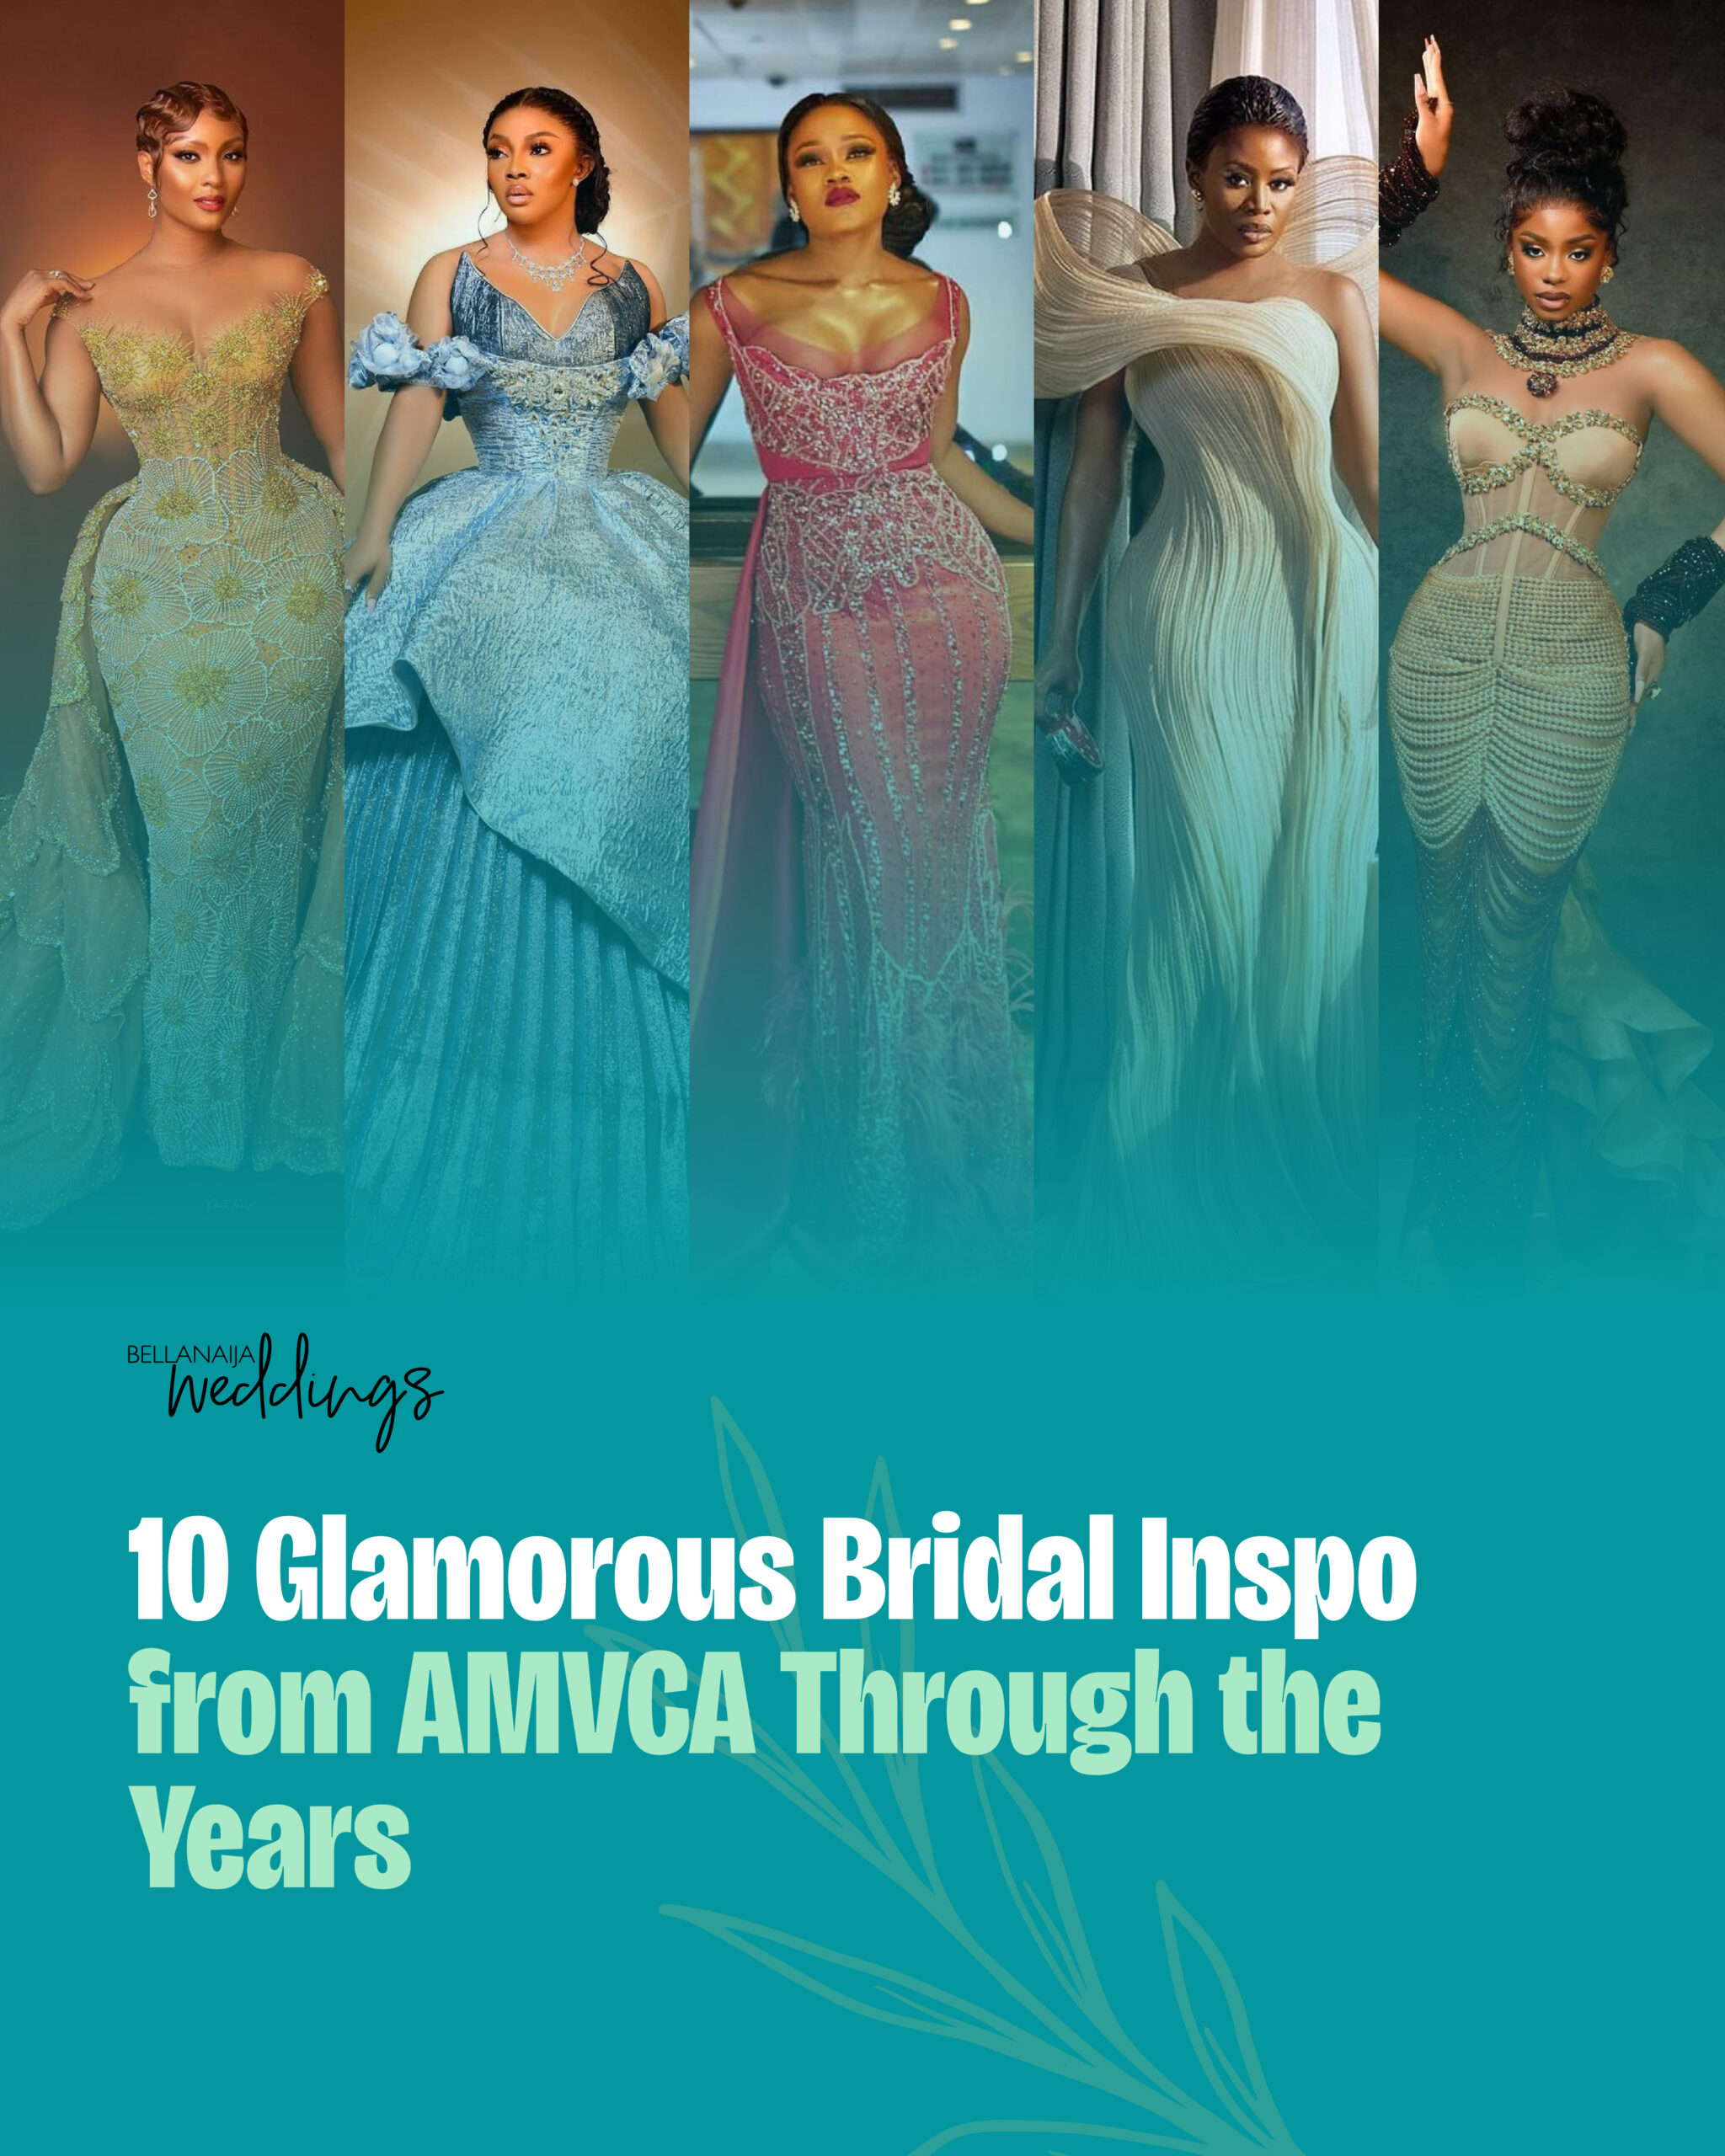 10 Glamorous Bridal Inspos From AMVCA By The Years